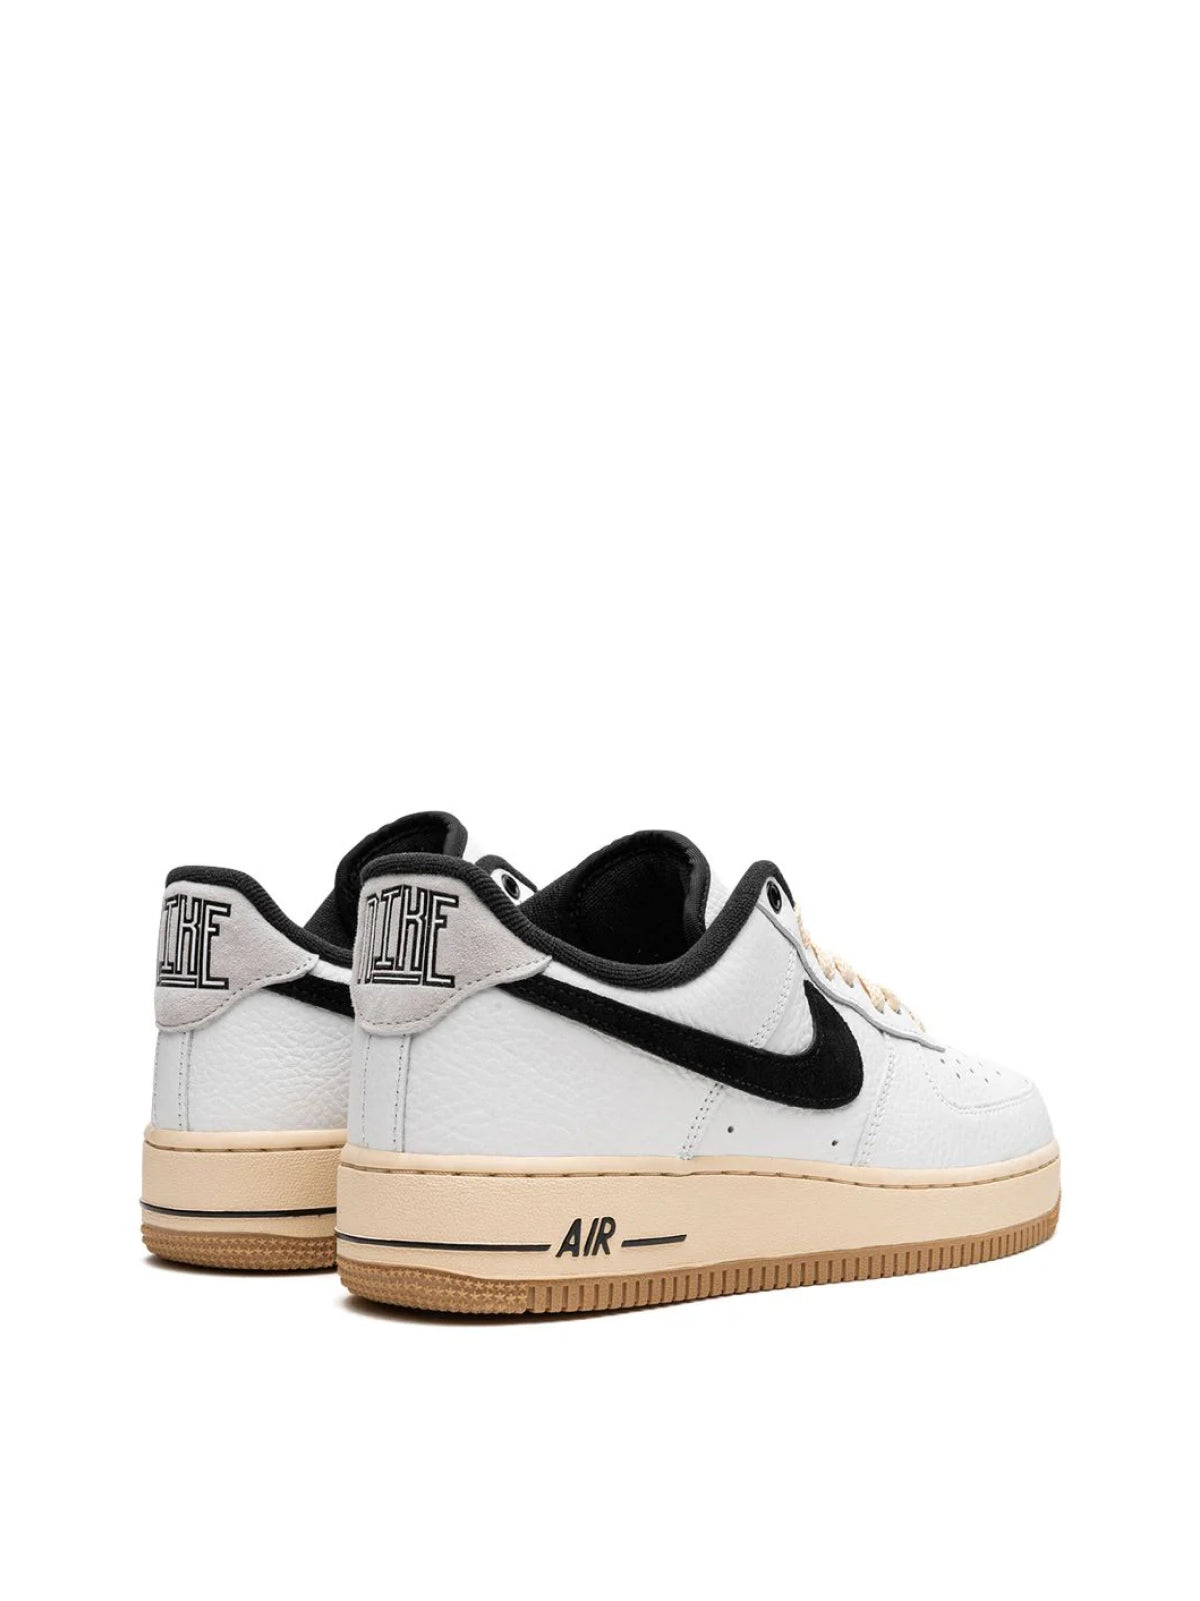 Air Force 1 '07 LX 'Command Force' Sneakers